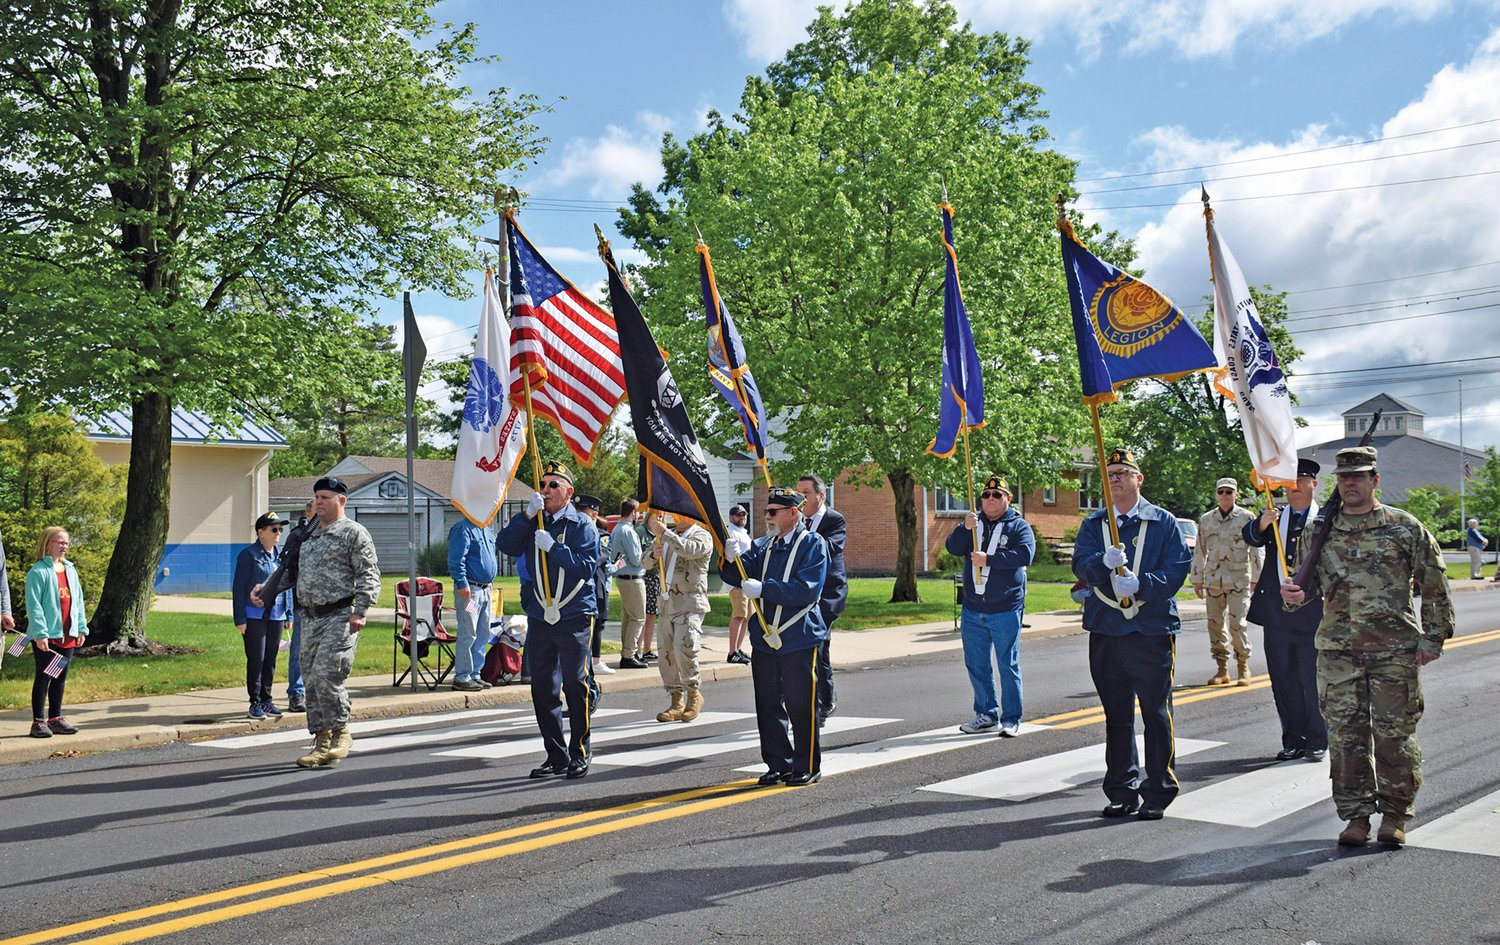 Quakertown’s American Legion Post 242 marches in the Memorial Day Parade.